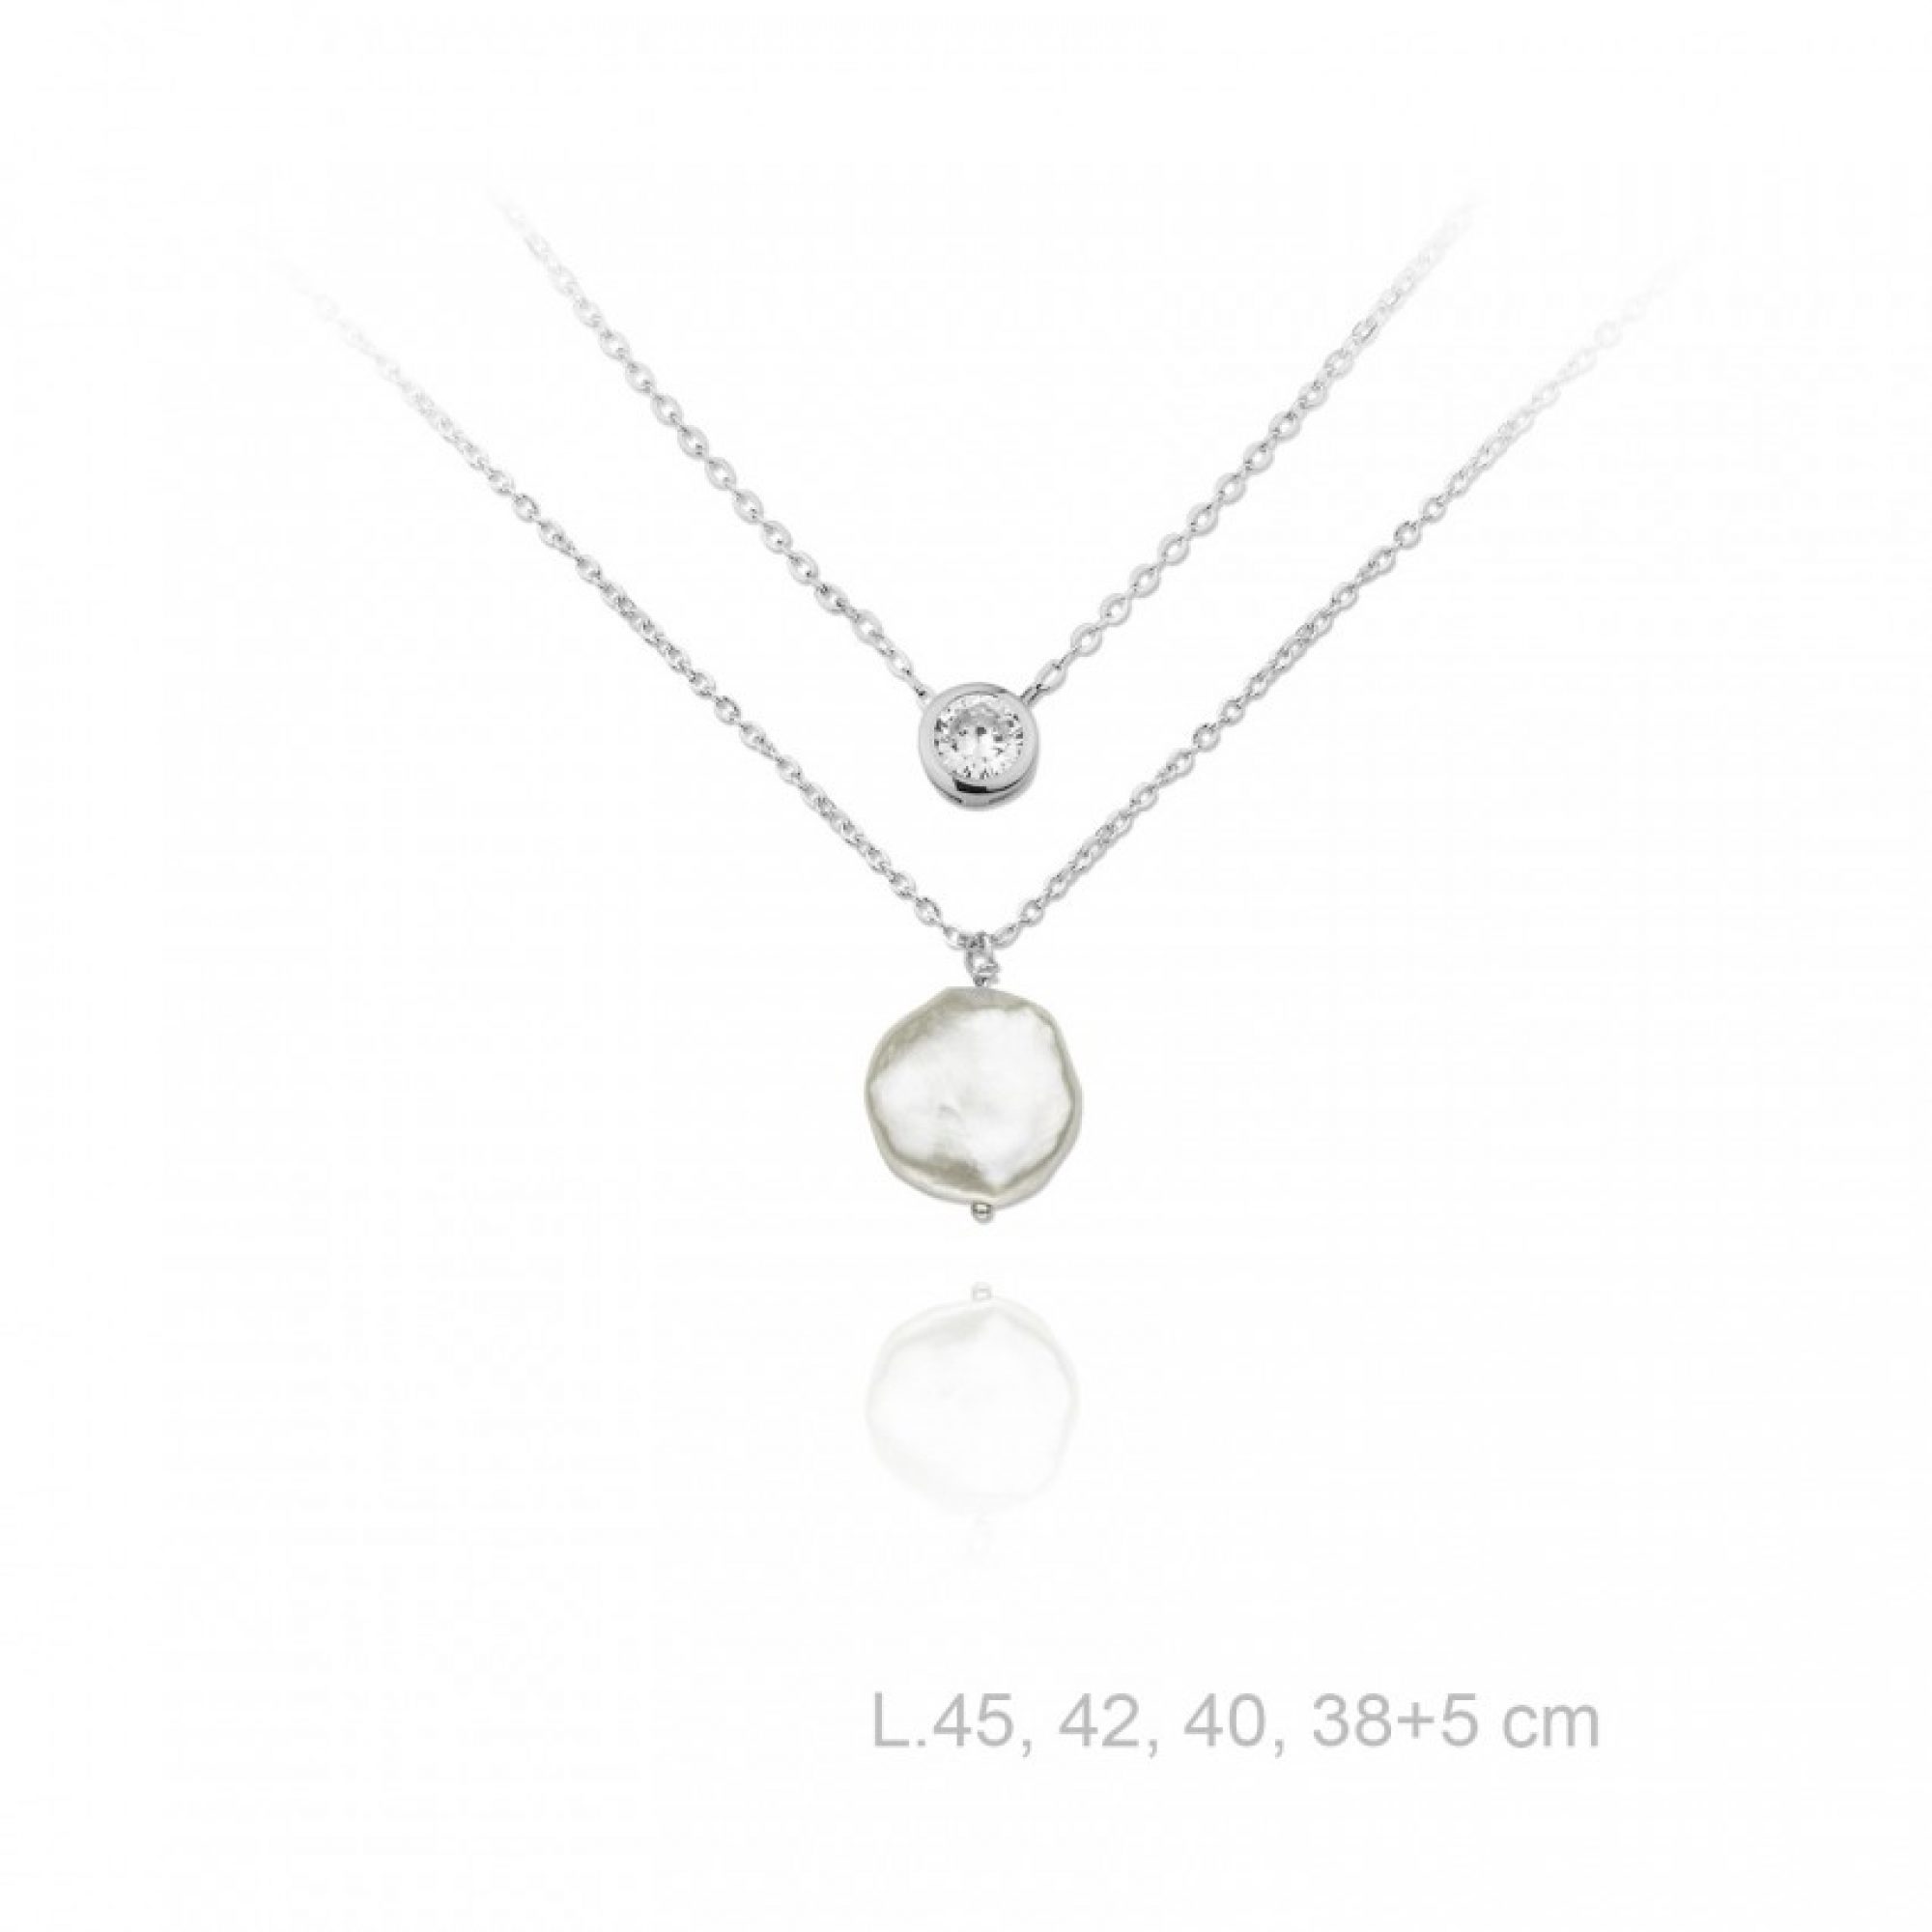 Silver double necklace with mother of pearl and zircon stone